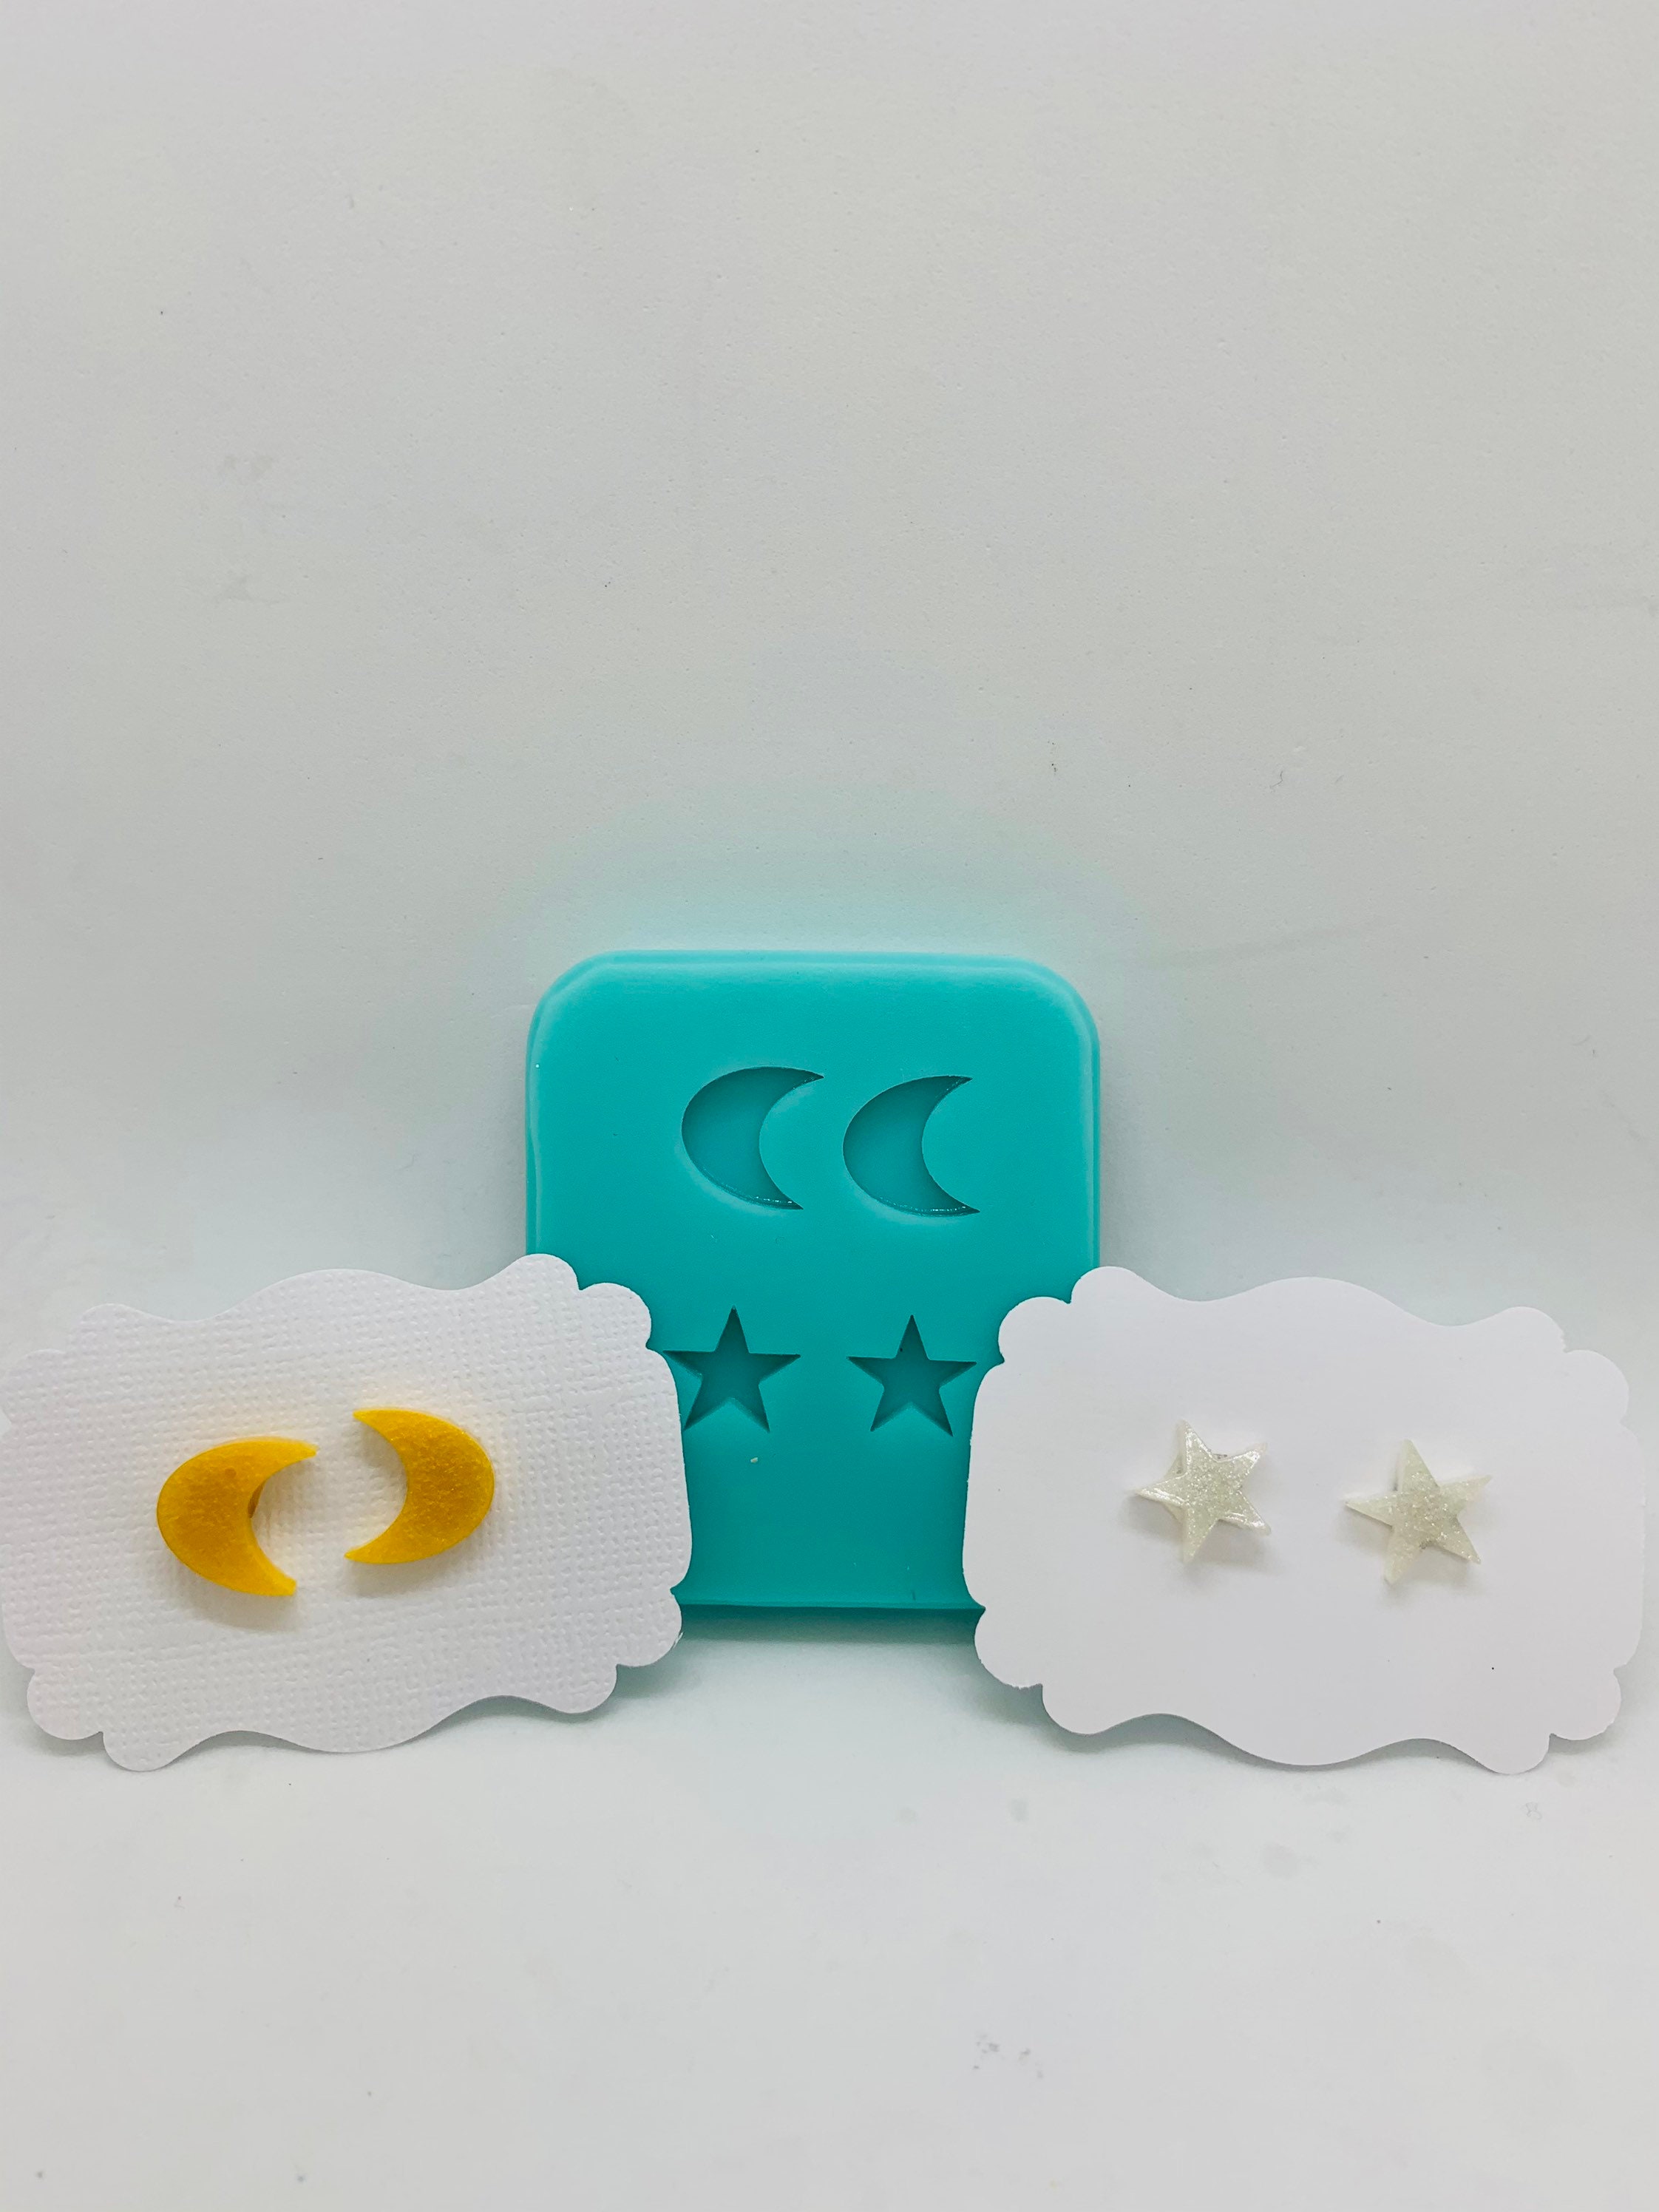 Shooting Star, Planet, & Moon Silicone Candy Mold - Party Time, Inc.